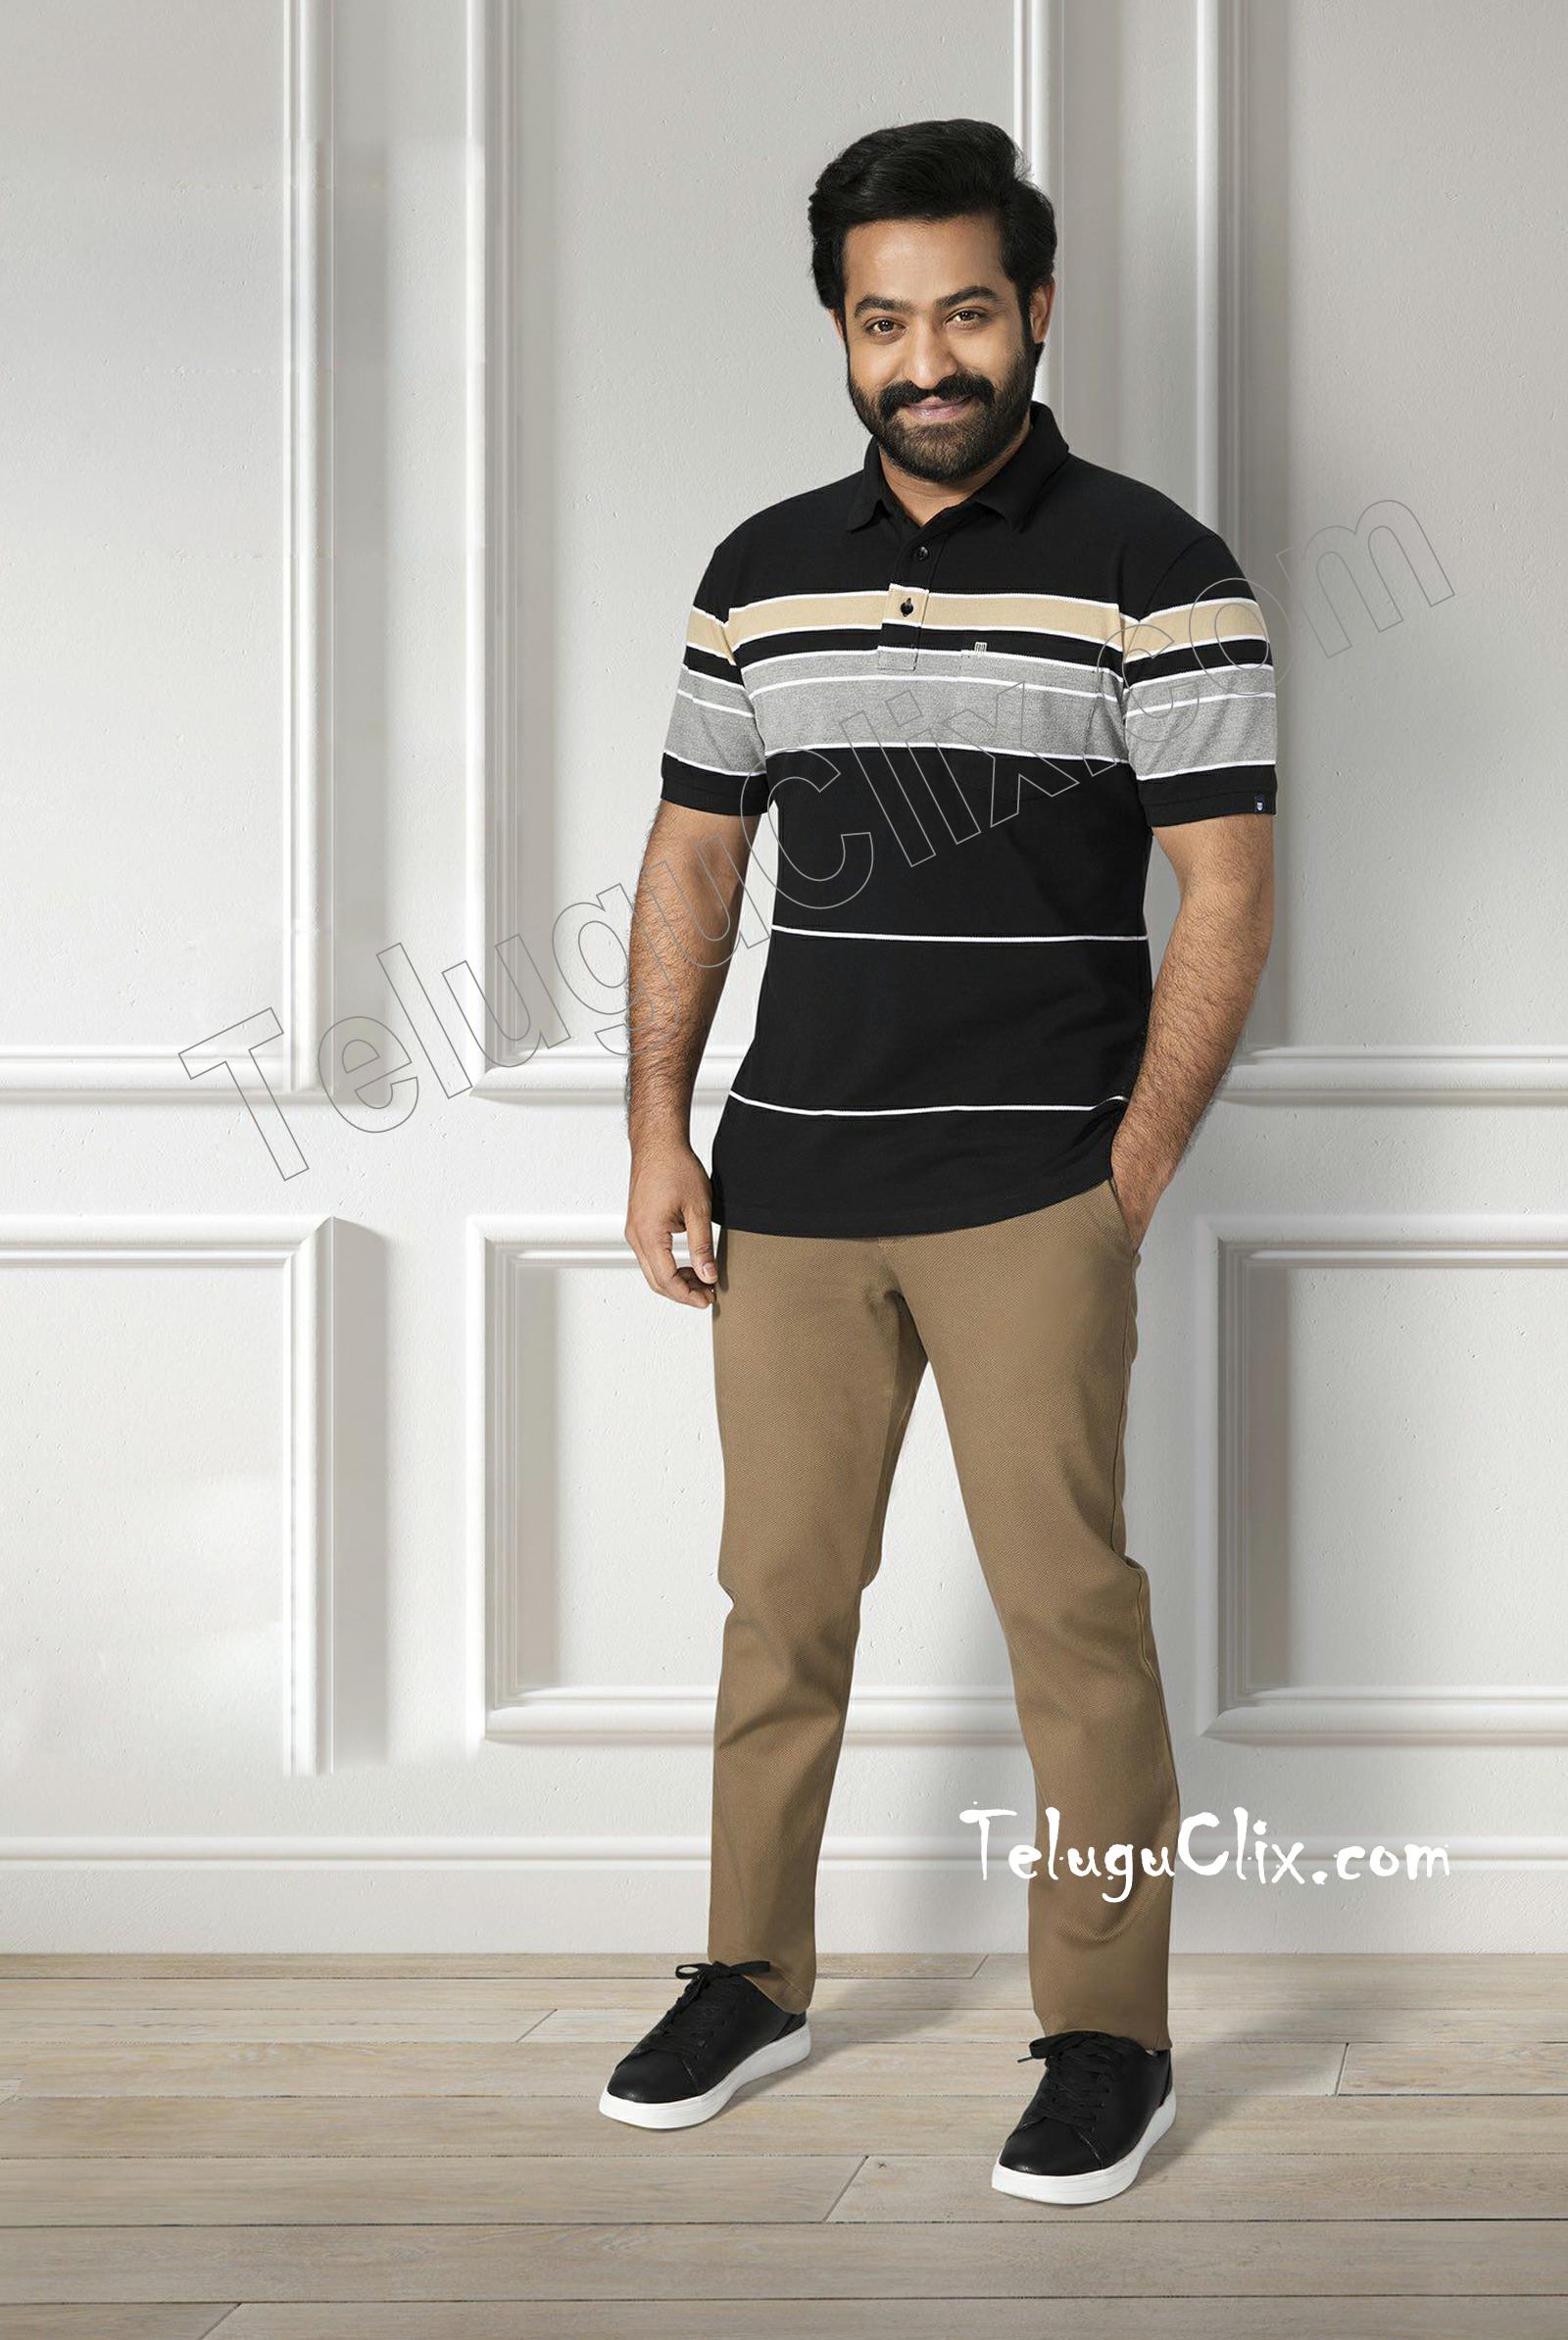 Jr Ntr Otto Hd - Without Edit Photos Hd , HD Wallpaper & Backgrounds